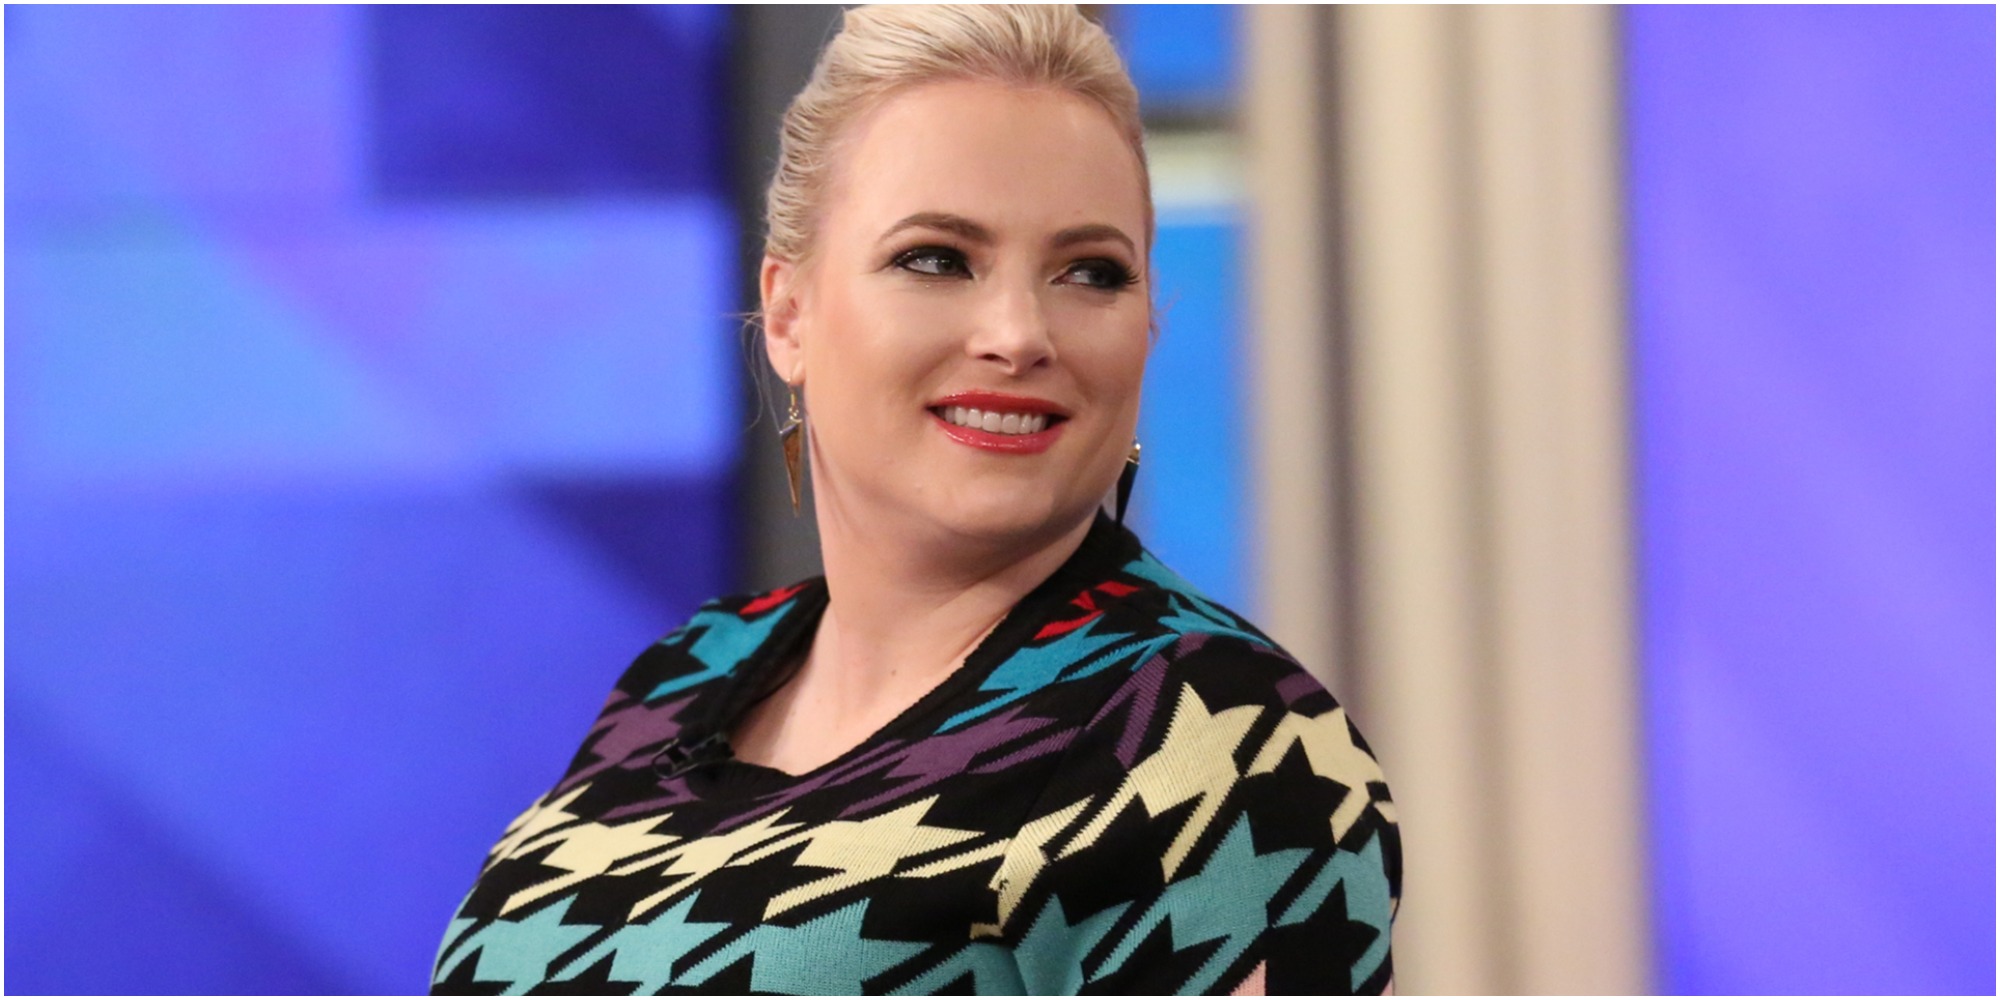 Meghan McCain wears a colorful sweater on the set of "The View."